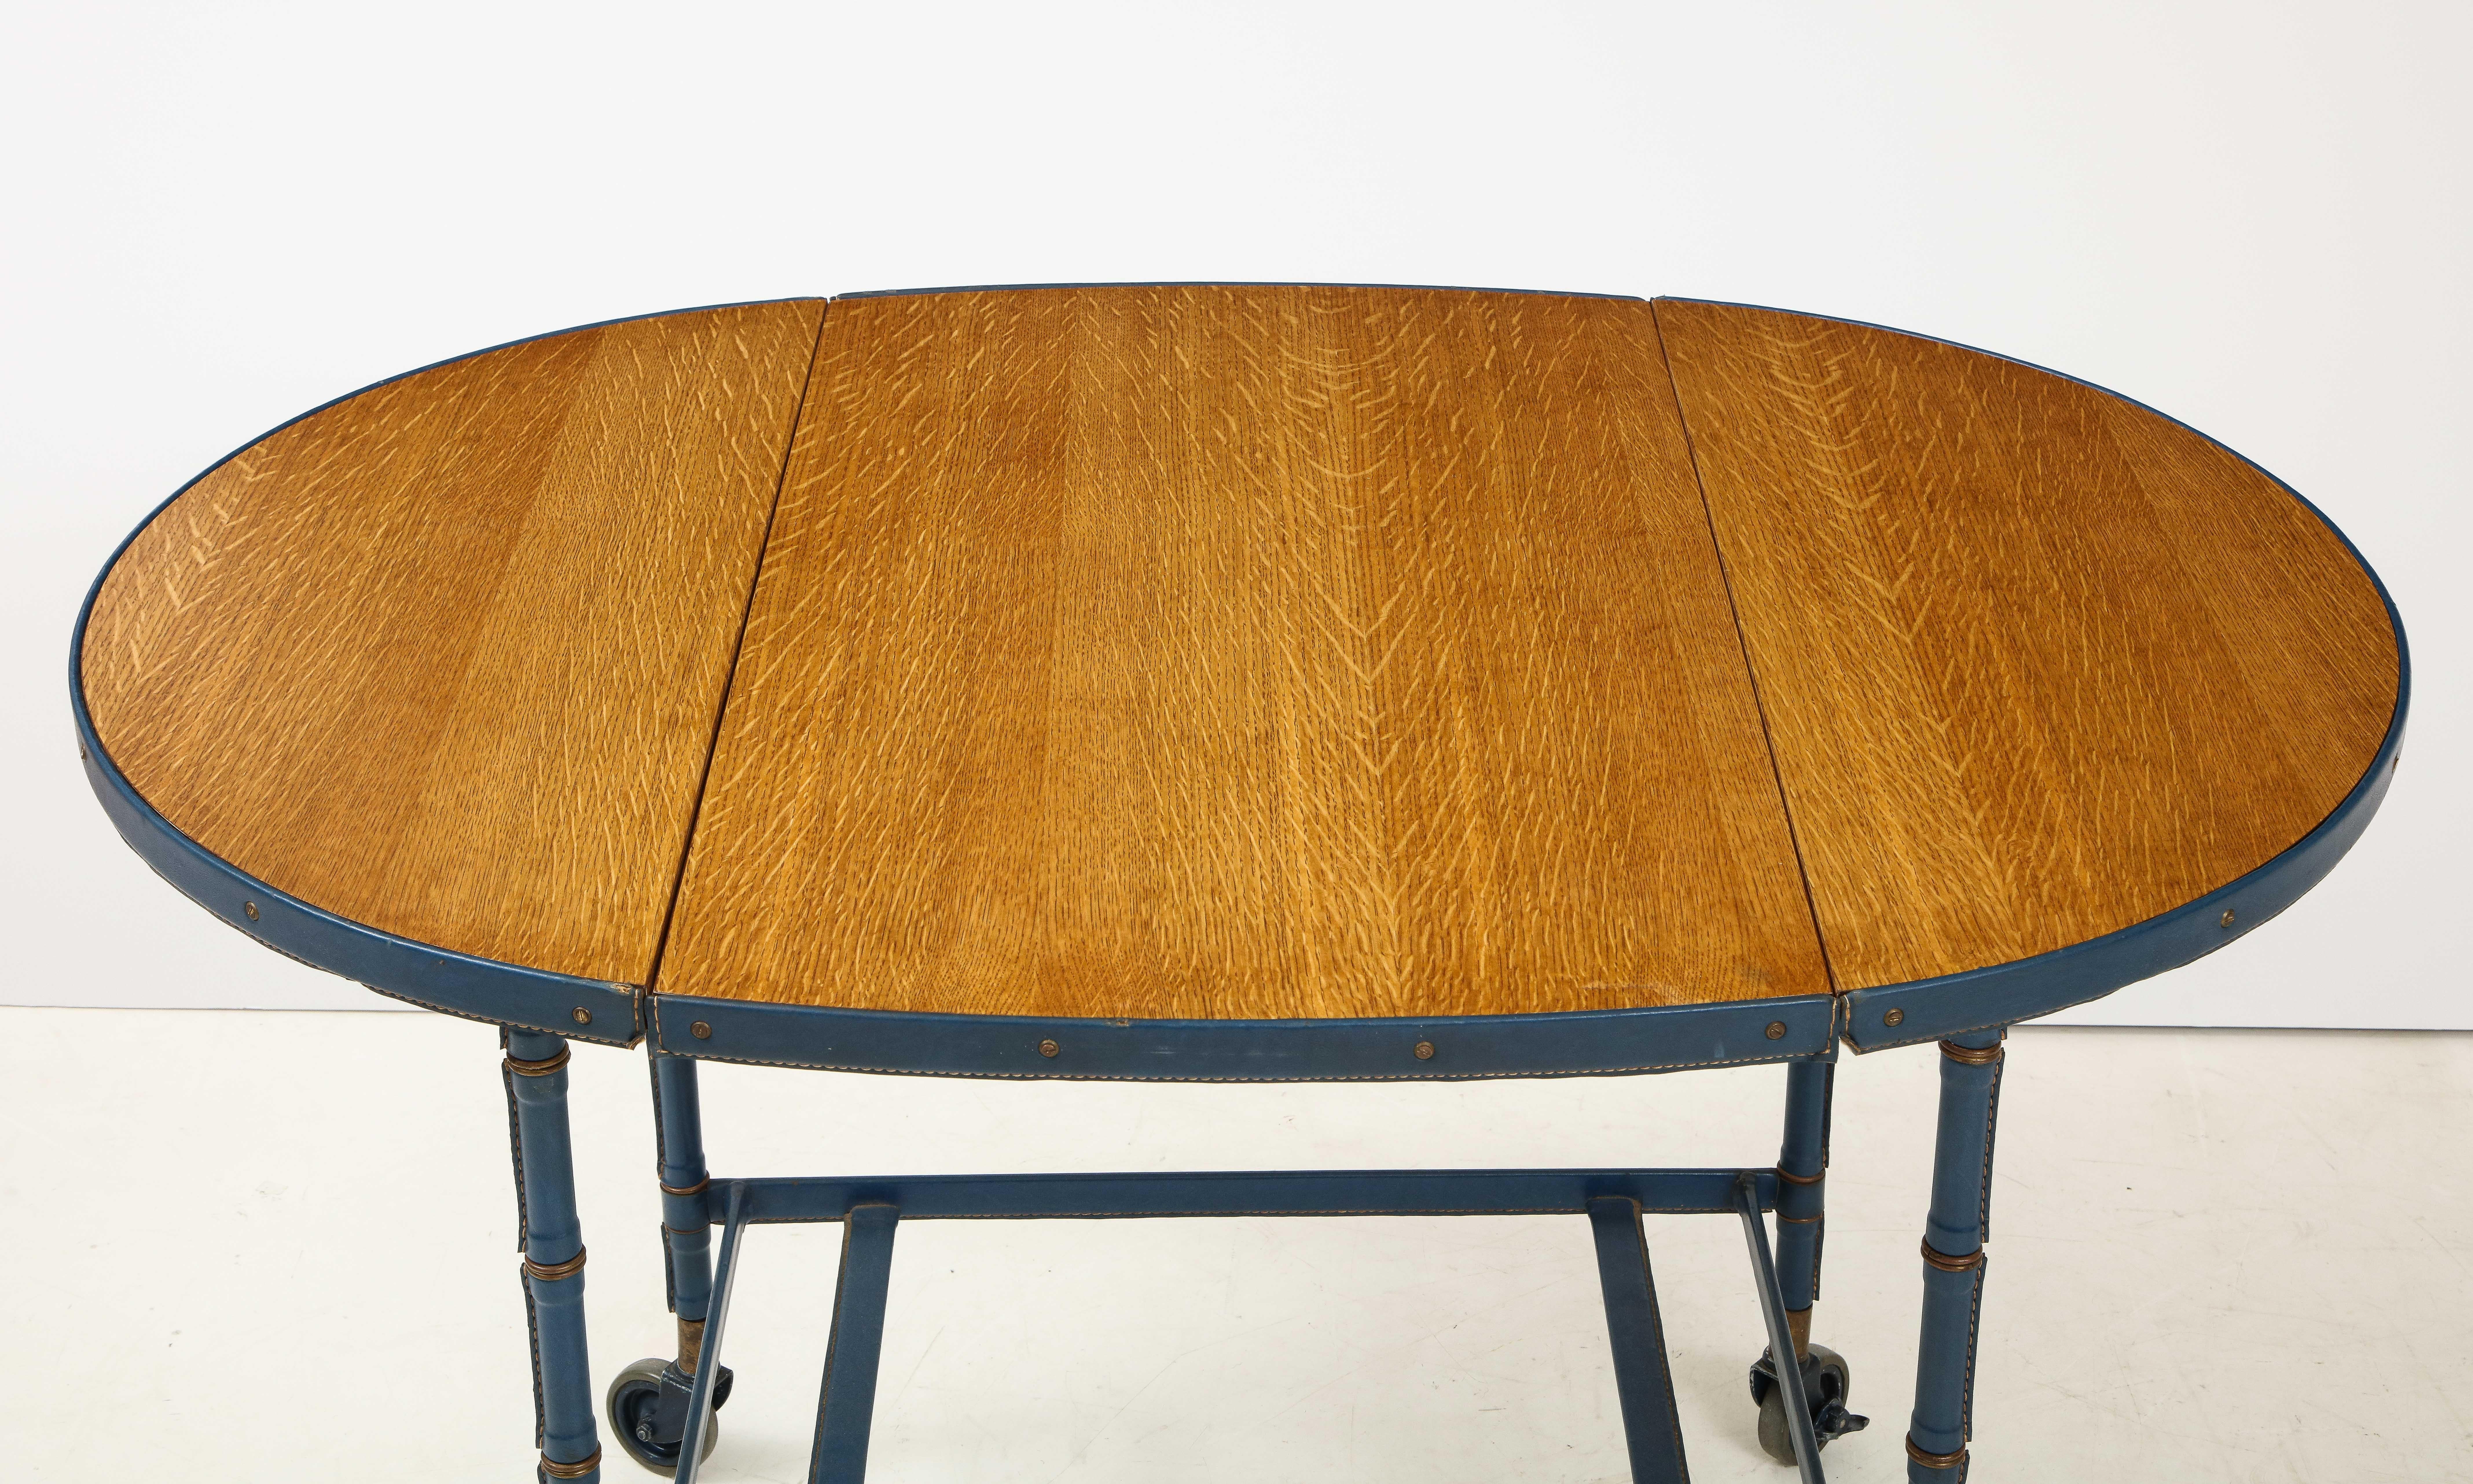 Mid-20th Century Rare Oak and Blue Stitched Leather Drop-Leaf Table / Bar Cart by Jacques Adnet For Sale